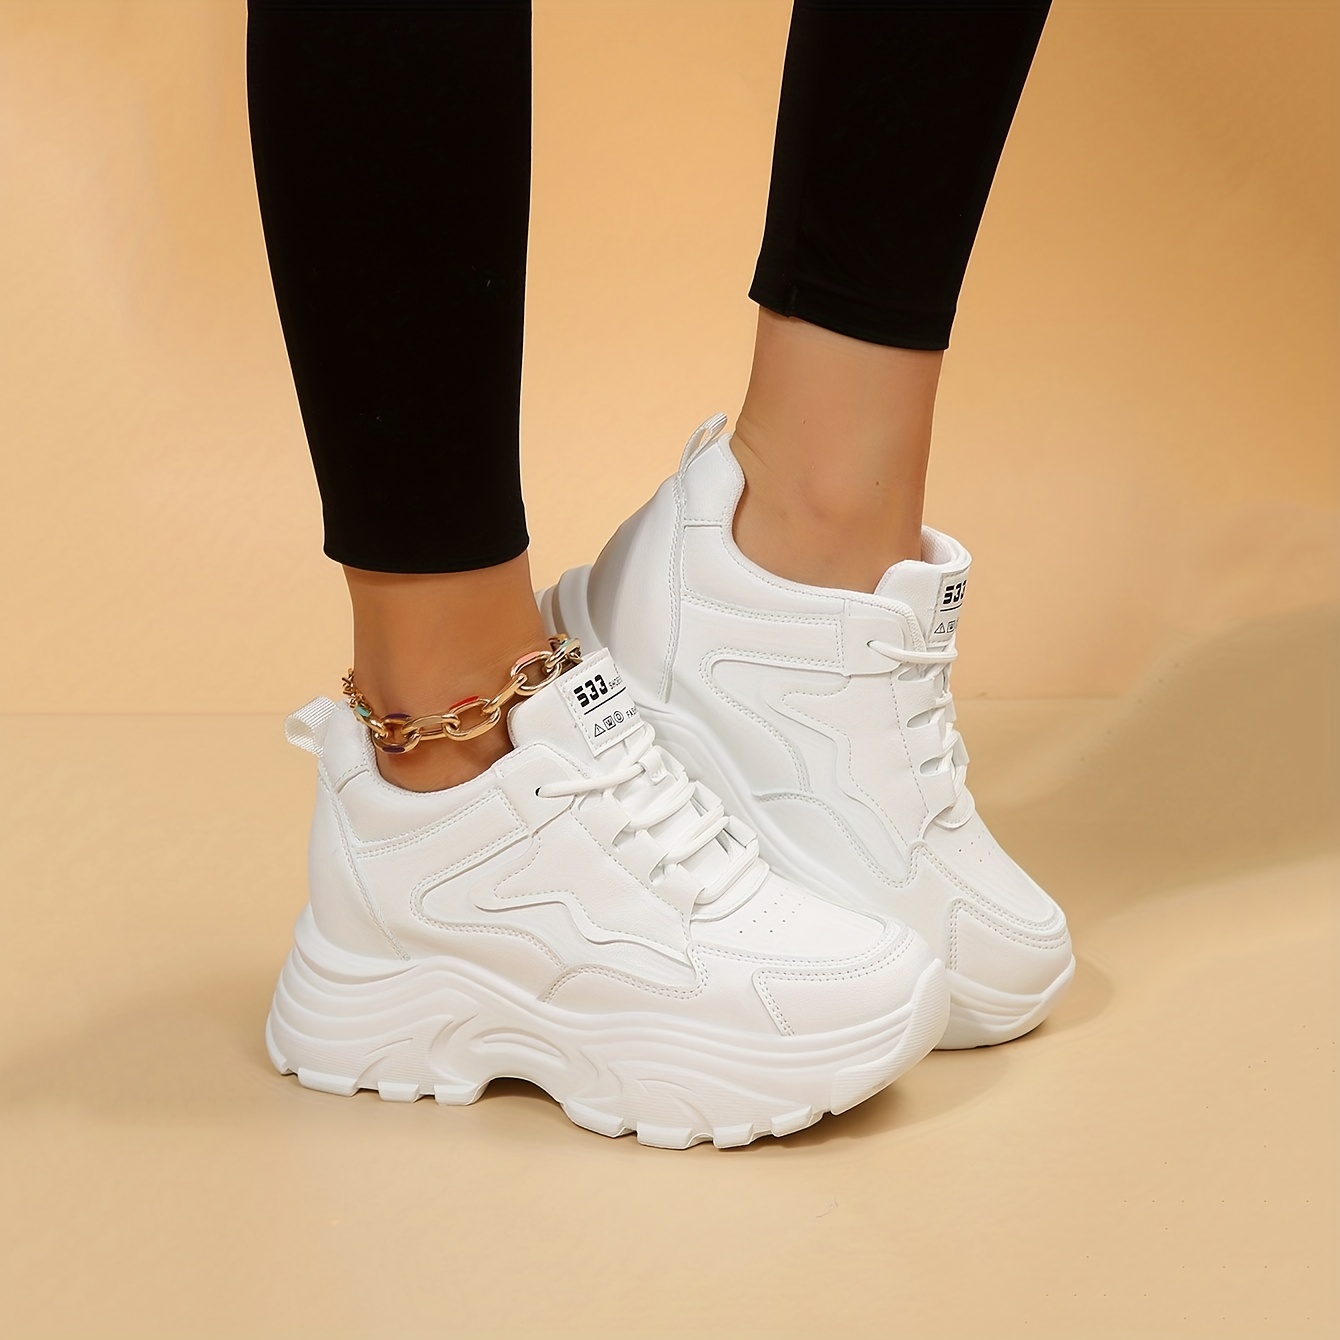 Women's Trendy Chunky Sneakers, Breathable Mesh Heightening Lace Up  Trainers, Fashion Low Top Platform Shoes